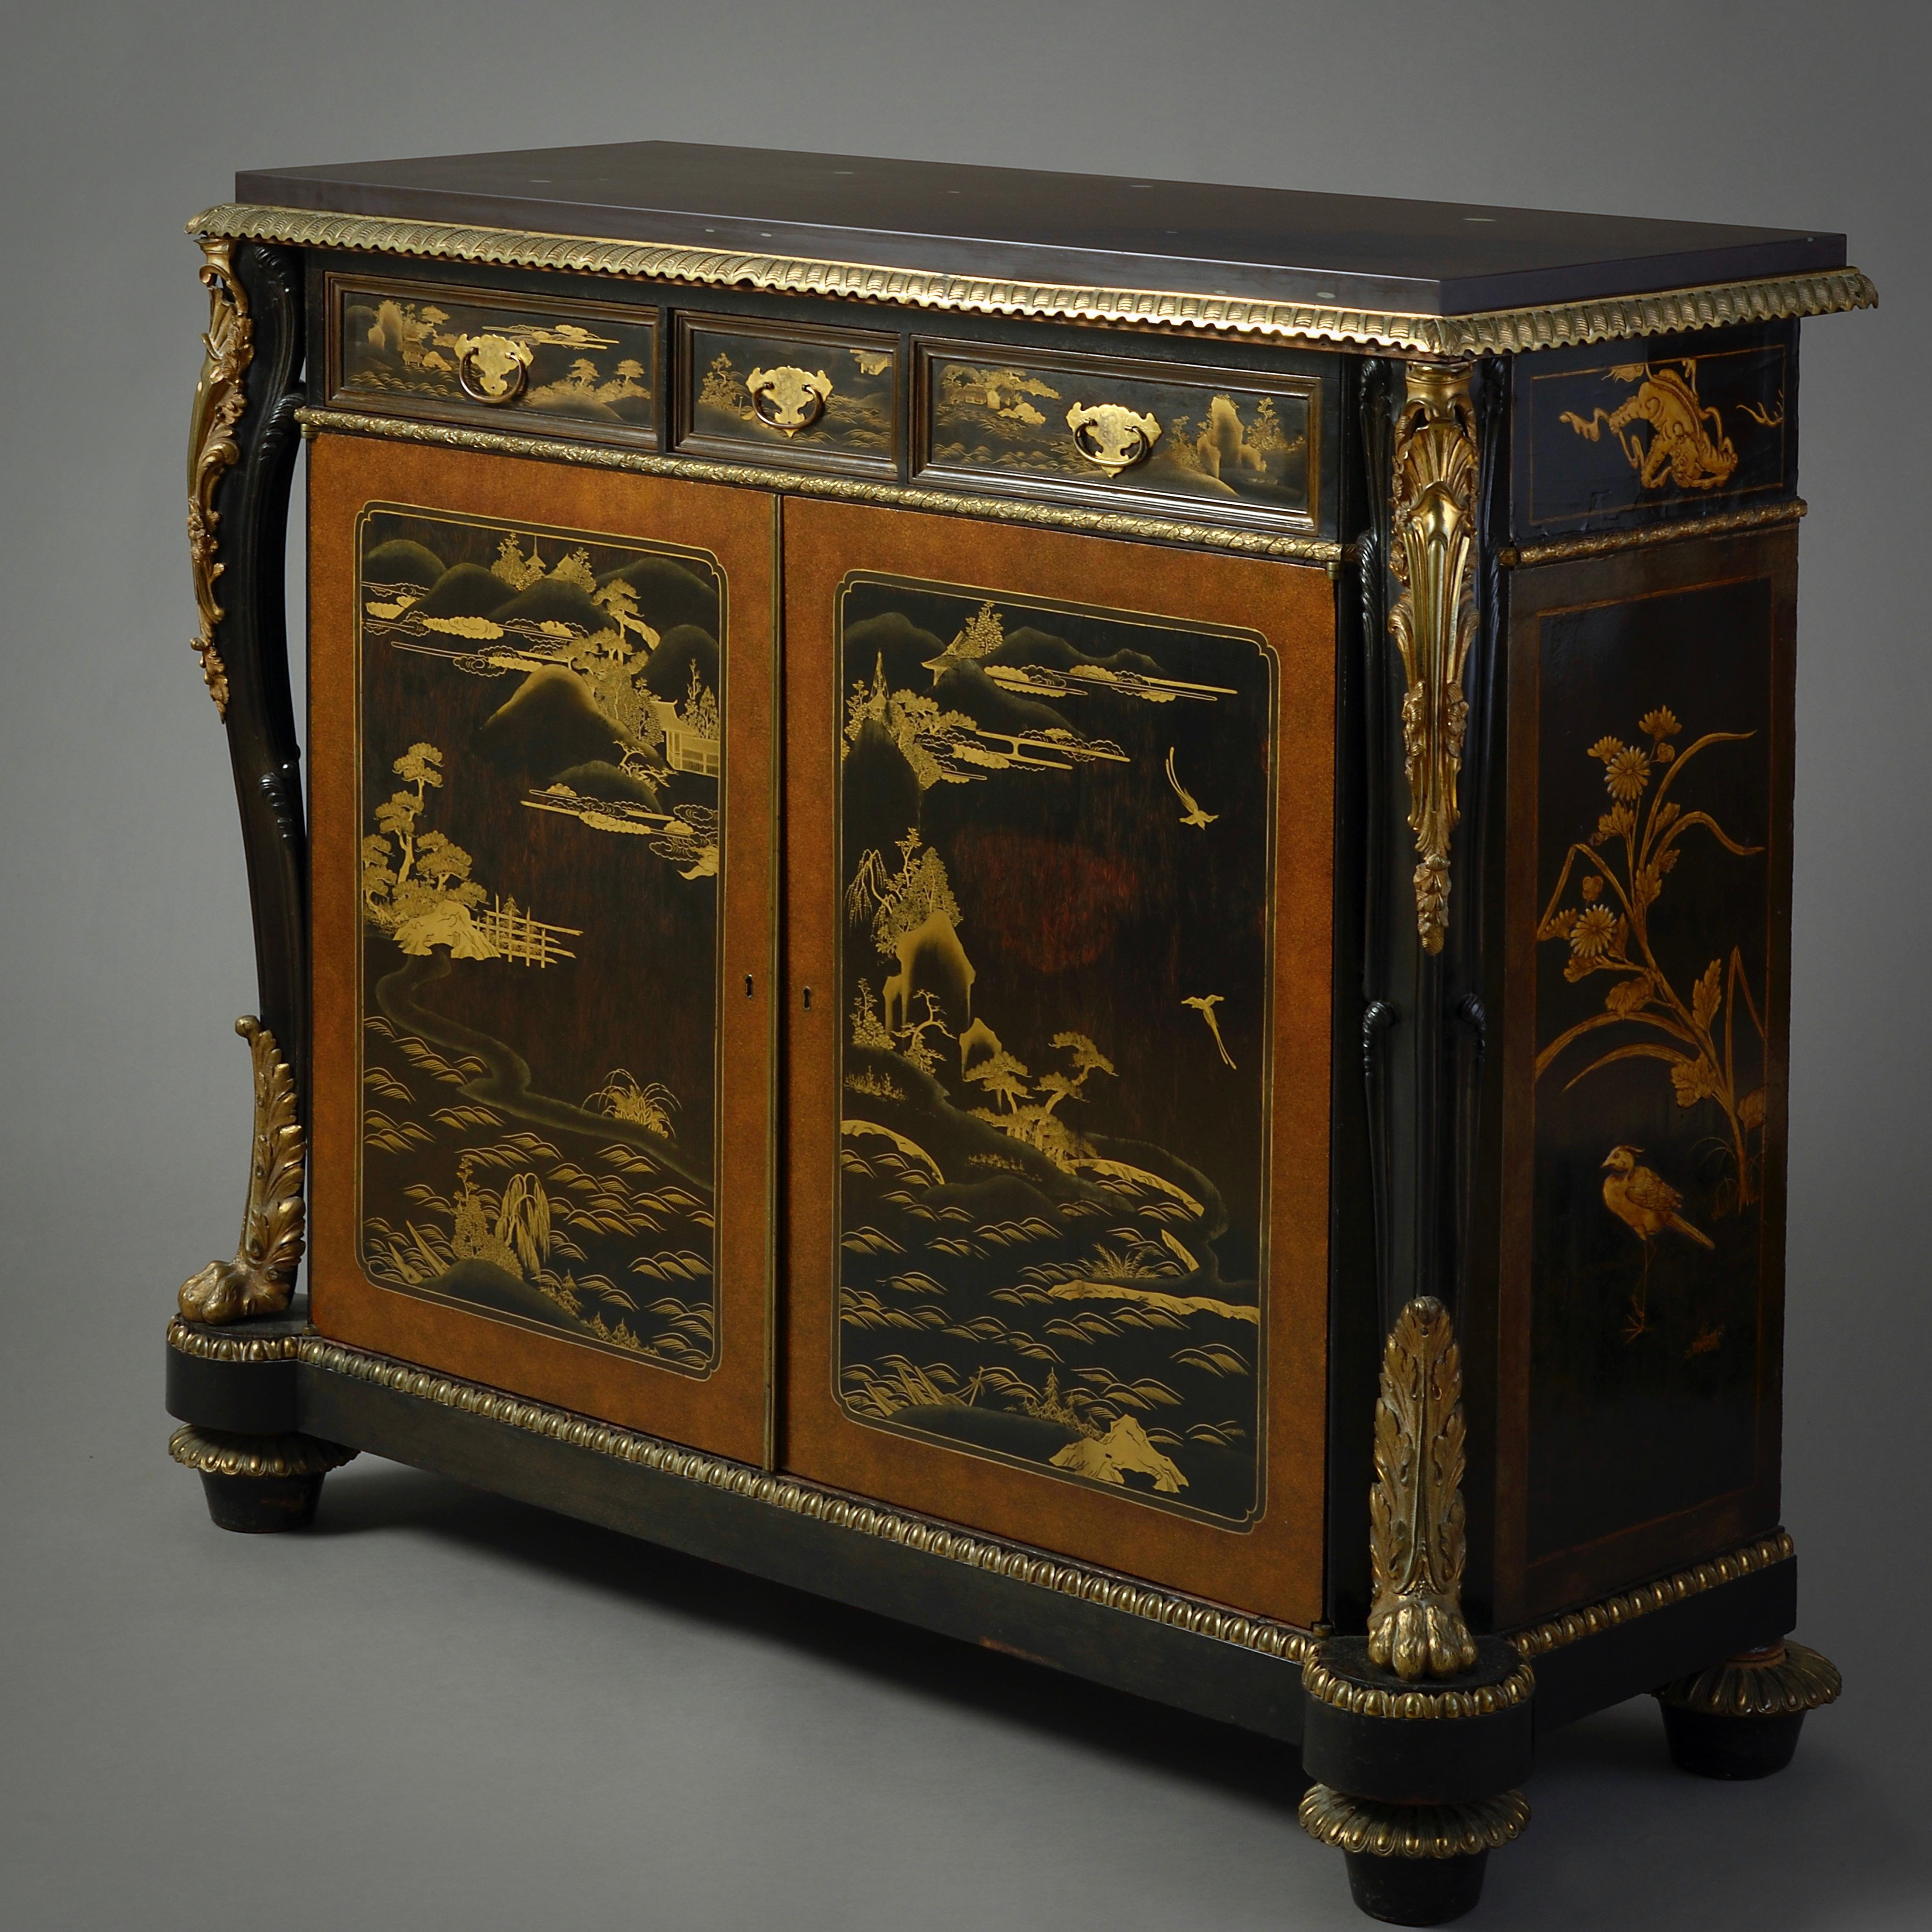 A George IV gilt-brass mounted ebonised, japanned, and lacquer side cabinet, circa 1830.

With later purple slate inset top. The frieze with three drawers above two doors enclosing adjustable mahogany shelves, all of Japanese lacquer. The sides